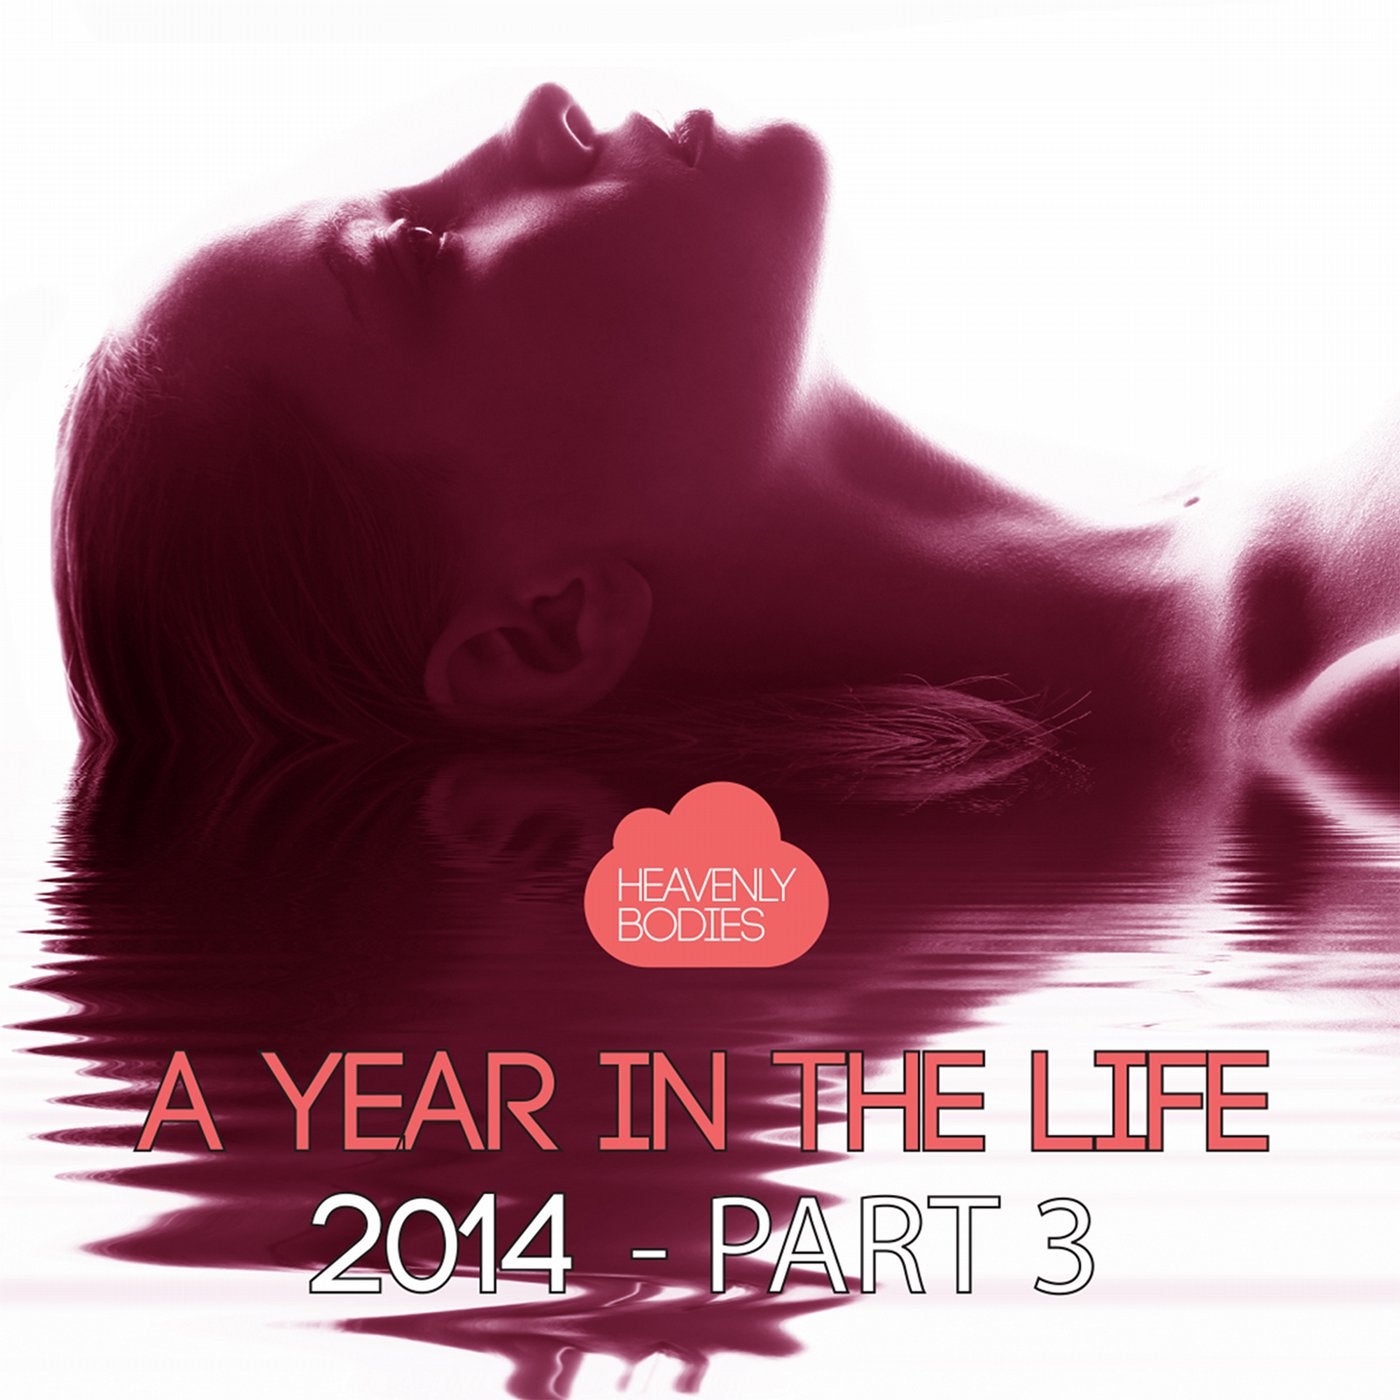 A Year In The Life Of Heavenly Bodies 2014, Pt. 3